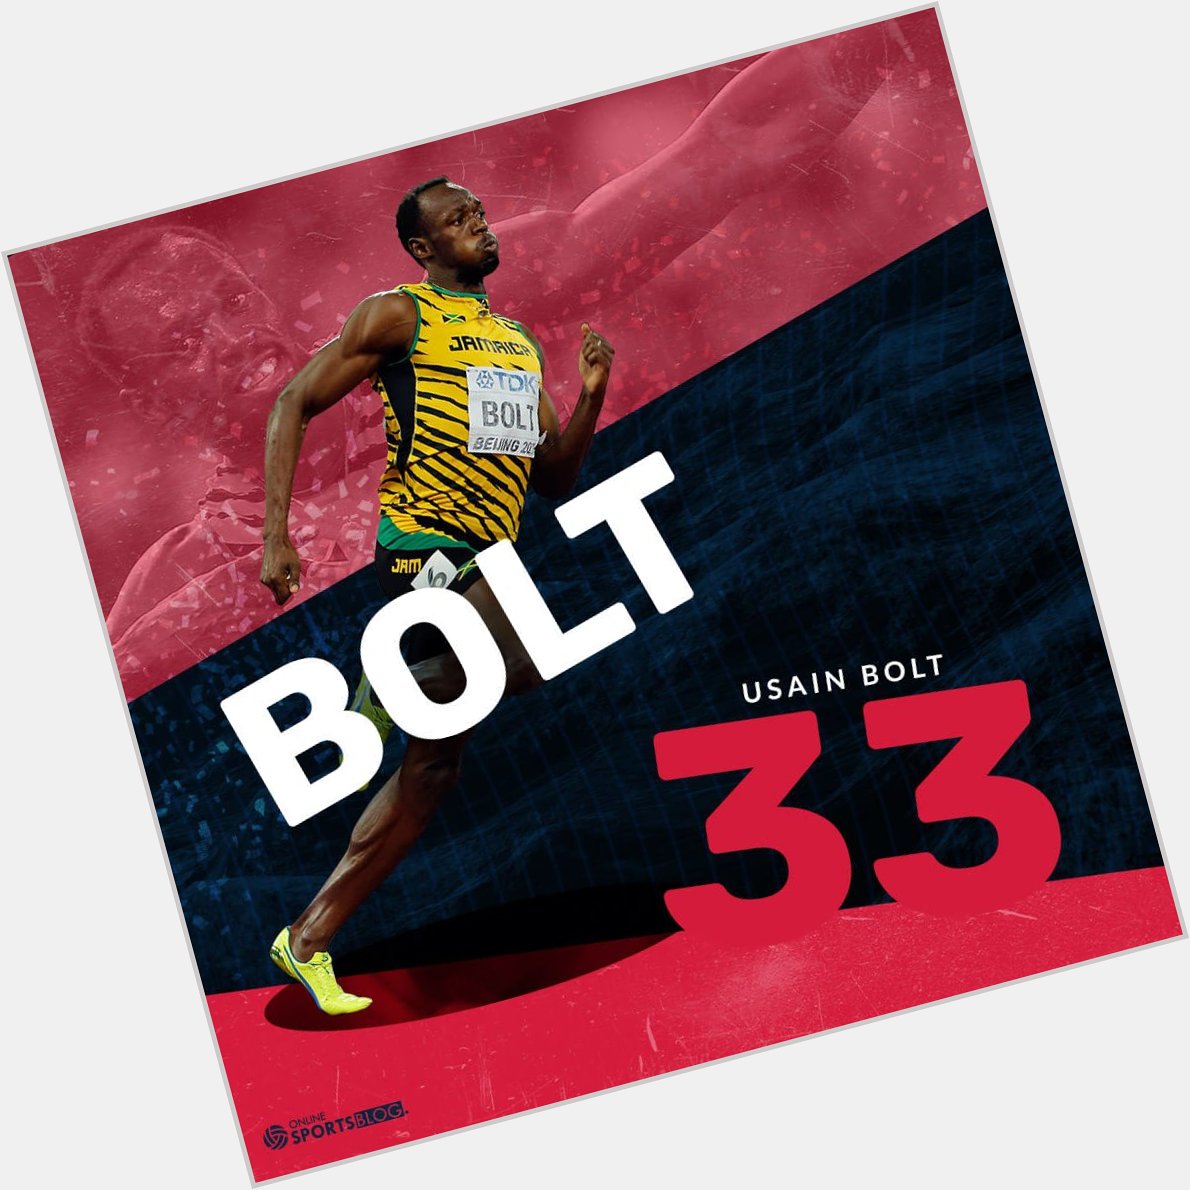  Happy 33rd Birthday to the fastest man in the world, Usain Bolt!  